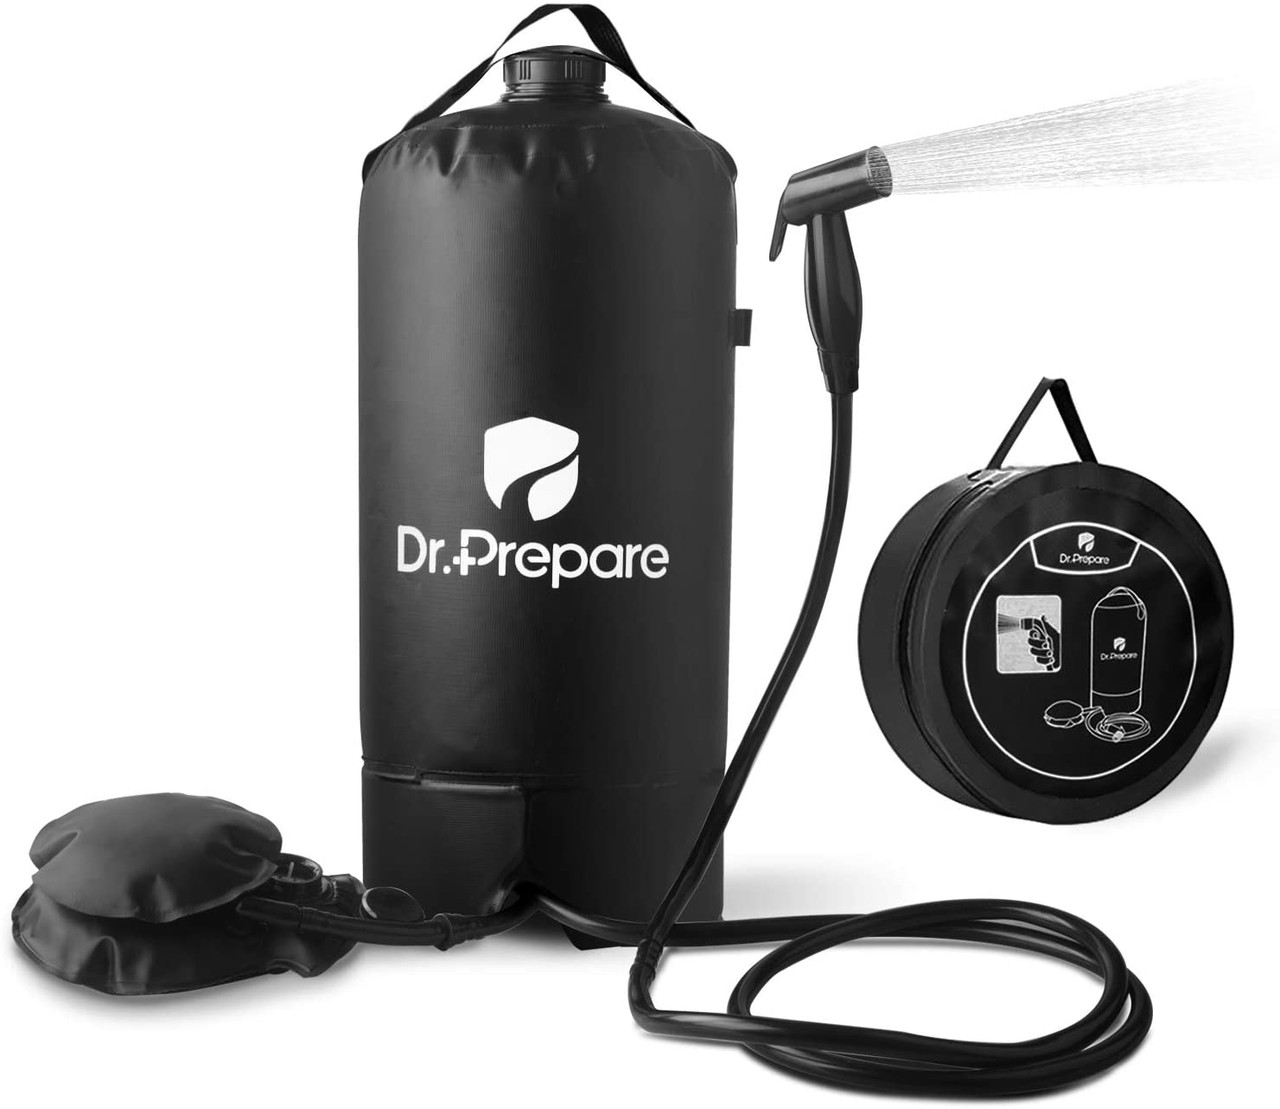  DR.PREPARE Portable Electric Camping Shower, 4 Gallons/15L,  Round, 2 Settings, Rechargeable Air Pump, Constant Spray Nozzle,  Easy-to-Refill Screw Cap, Warm in Sunlight, Pack and Go : Sports & Outdoors